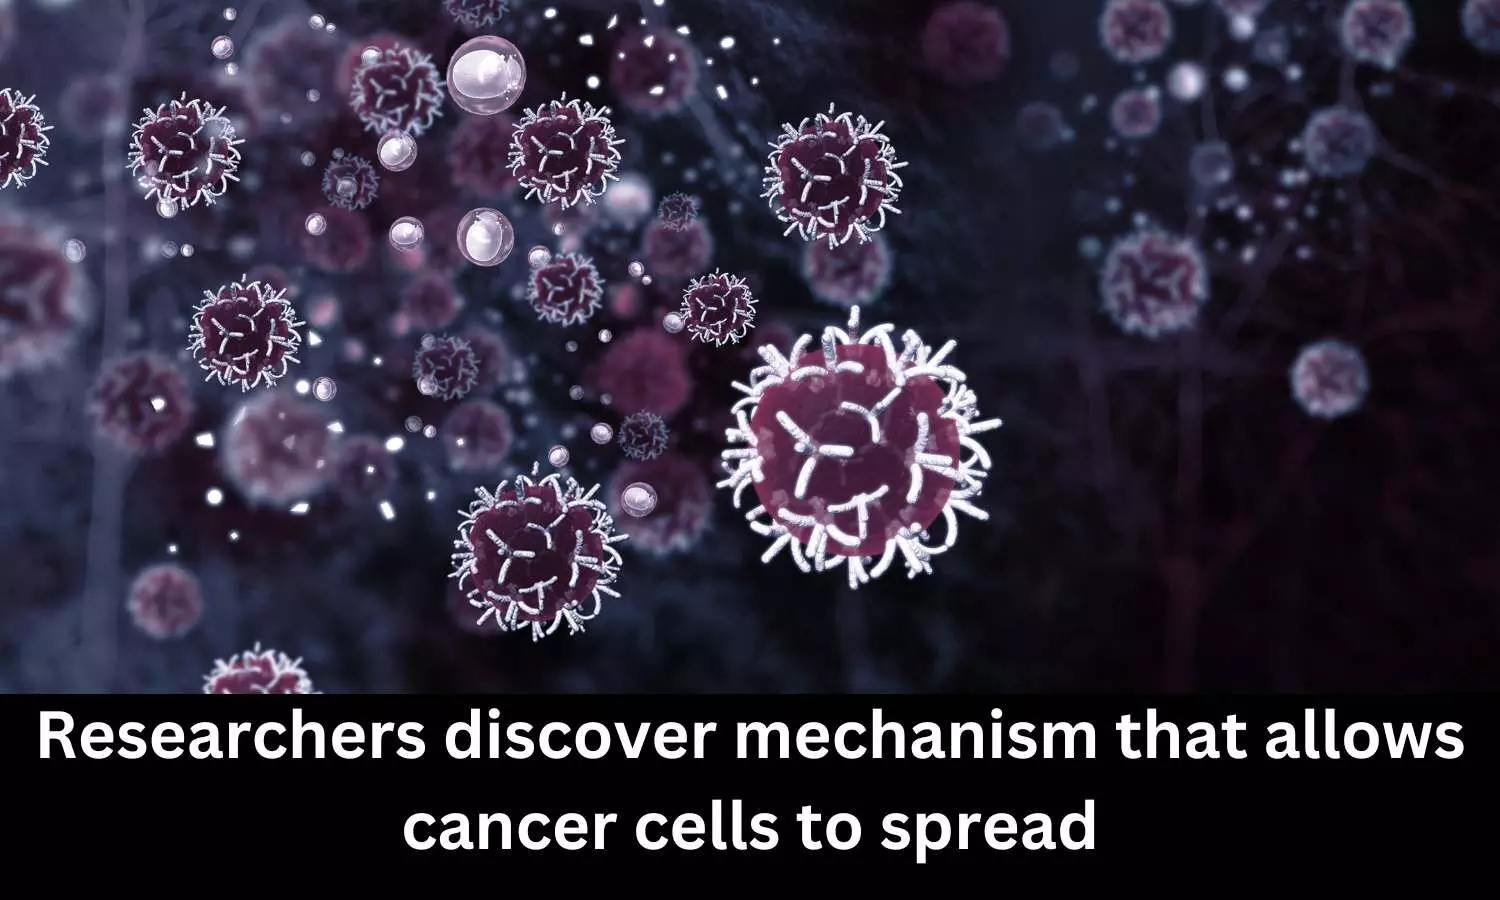 Researchers discover mechanism that allows cancer cells to spread